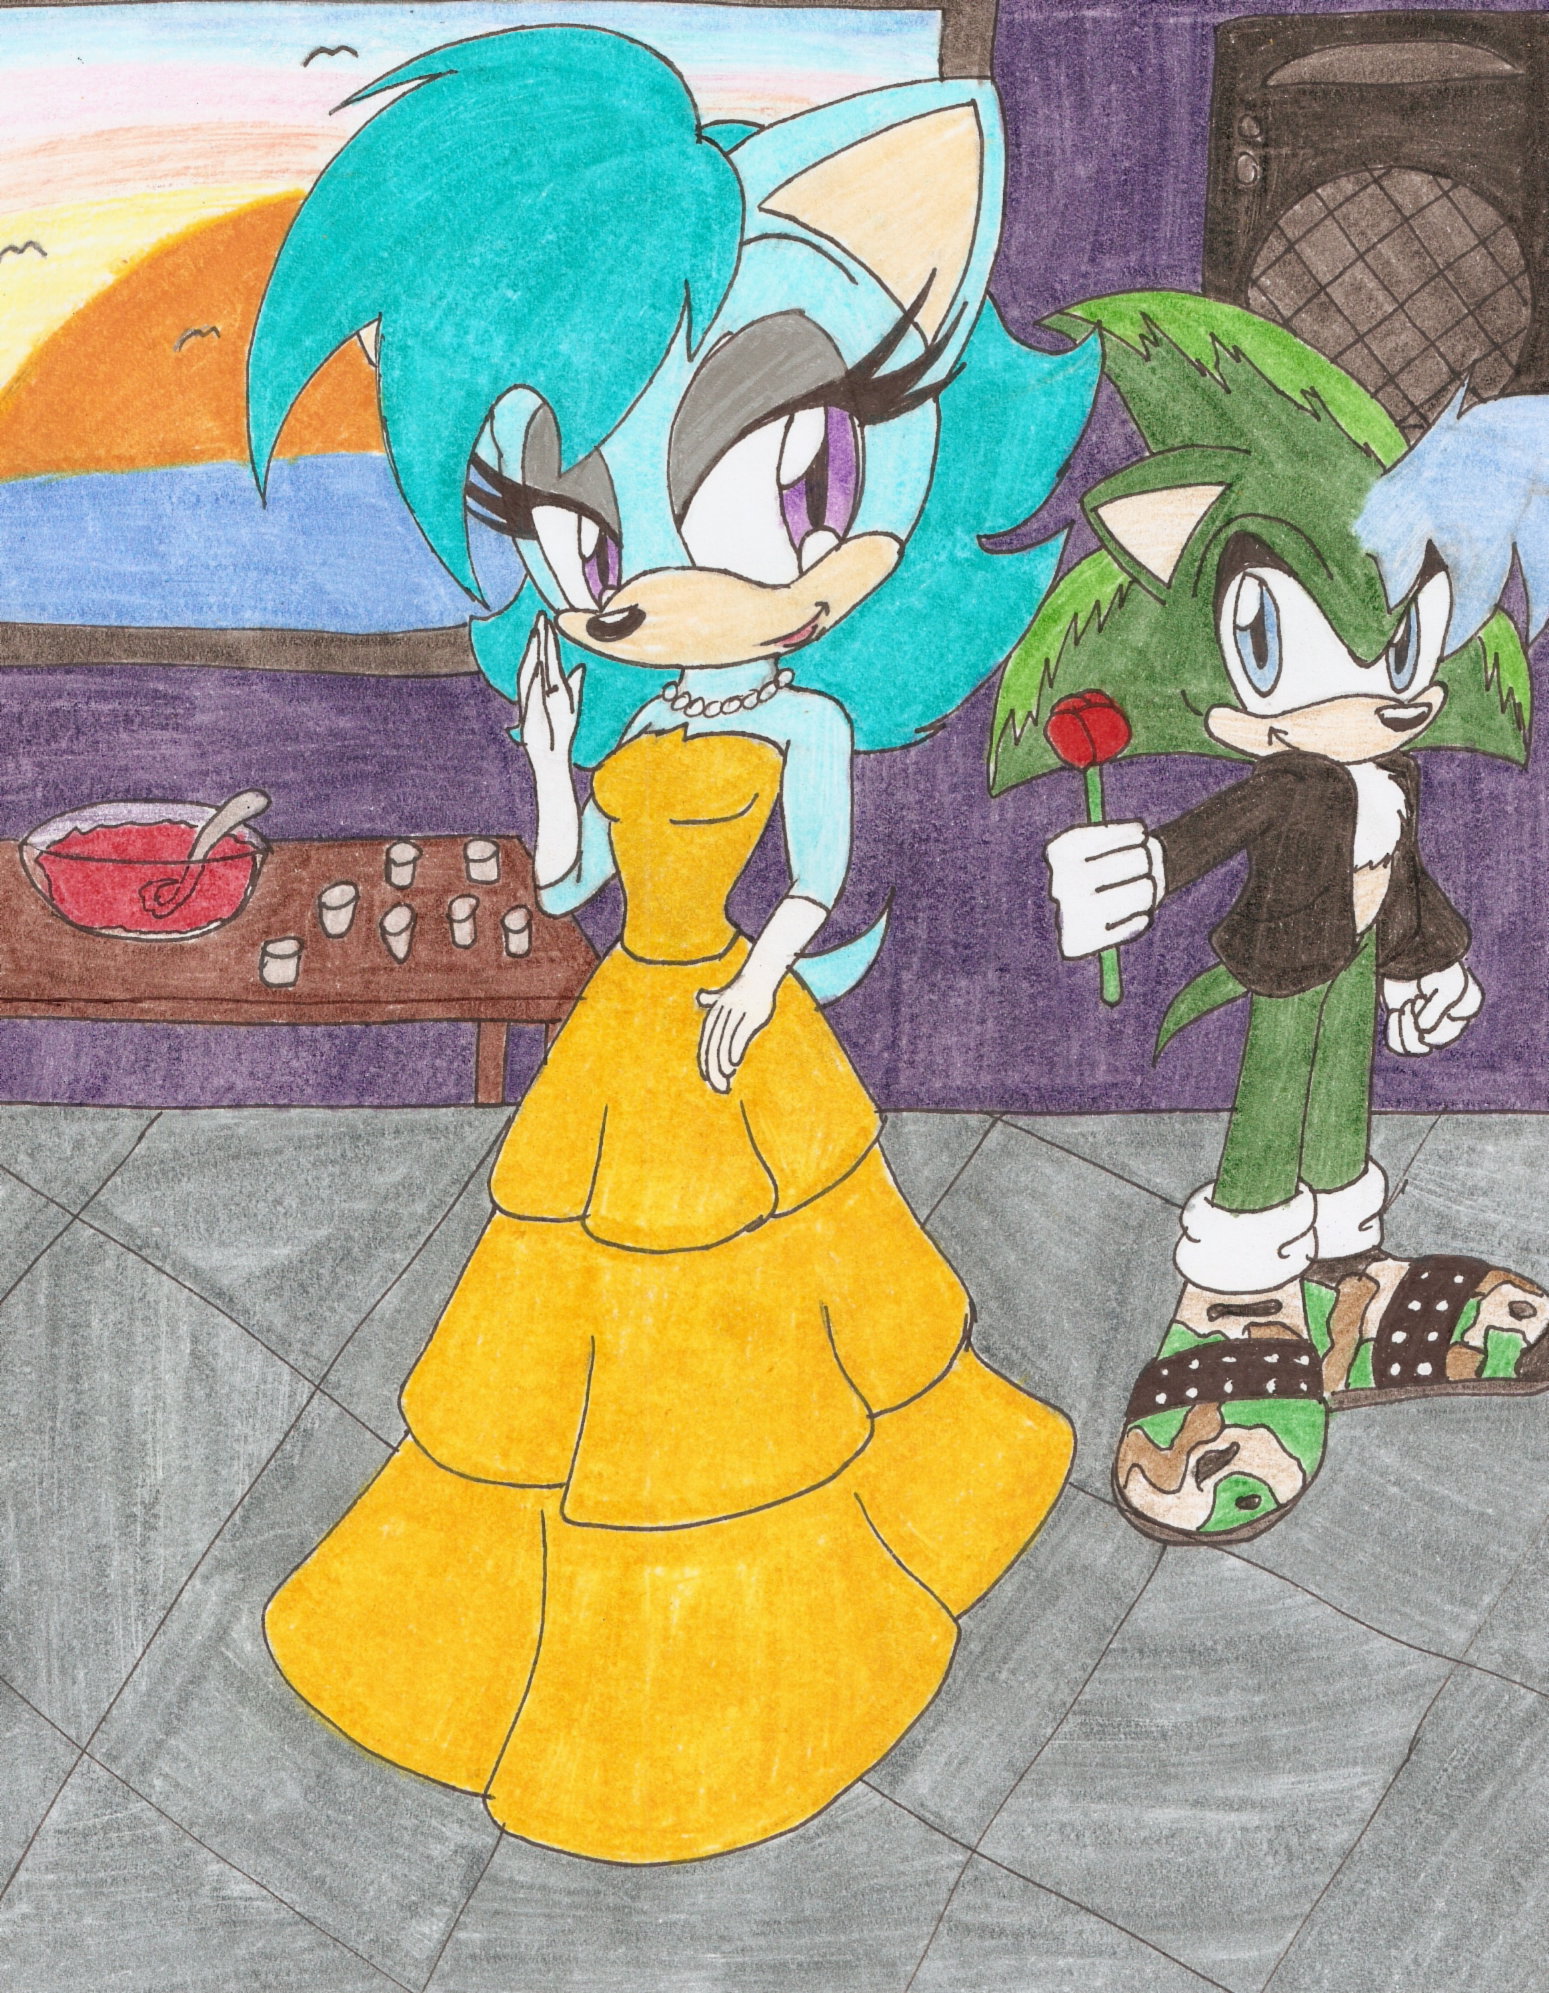 Misty and Chad at prom night by Melvintomm